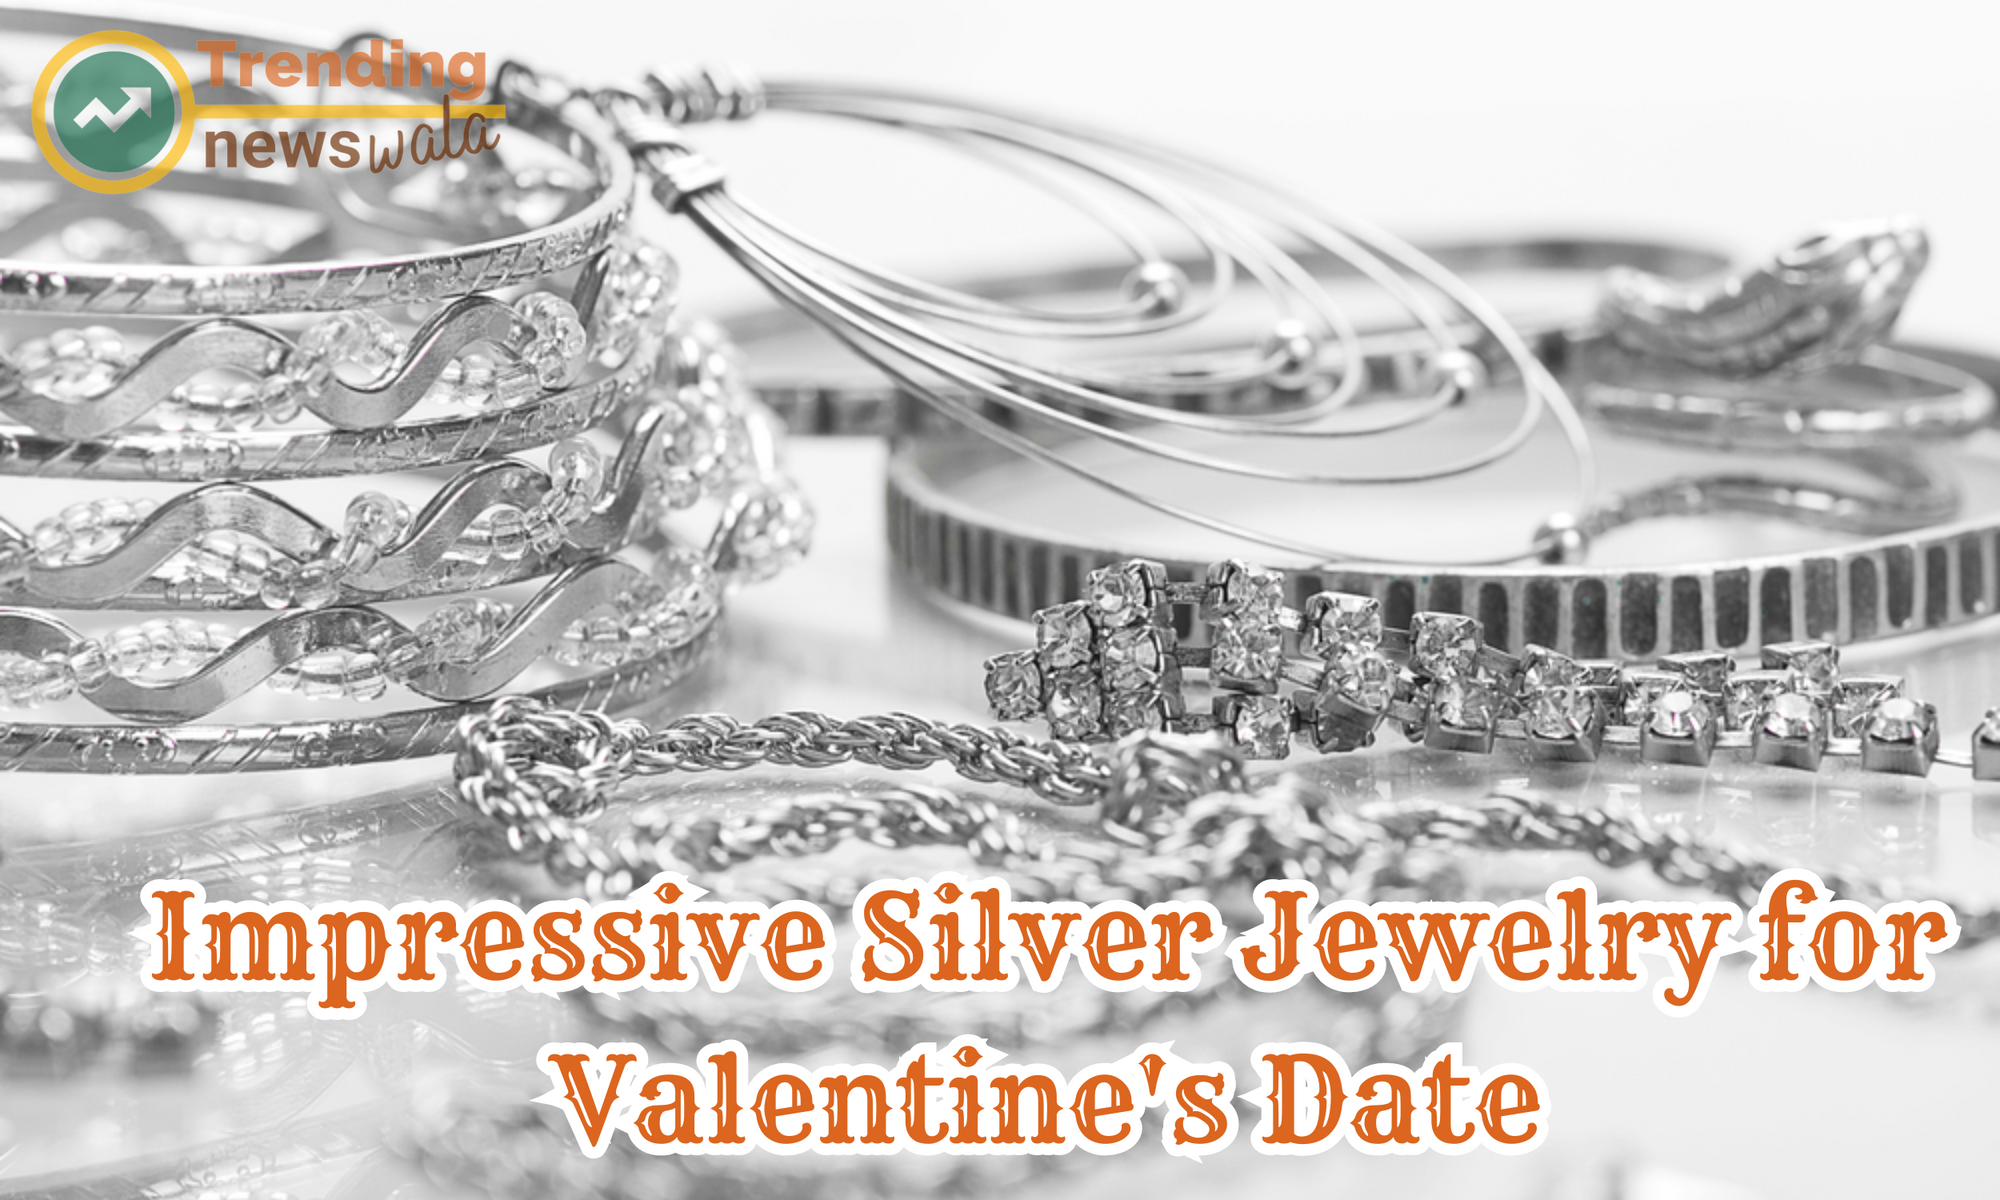 Choosing impressive silver jewelry for a Valentine's date involves